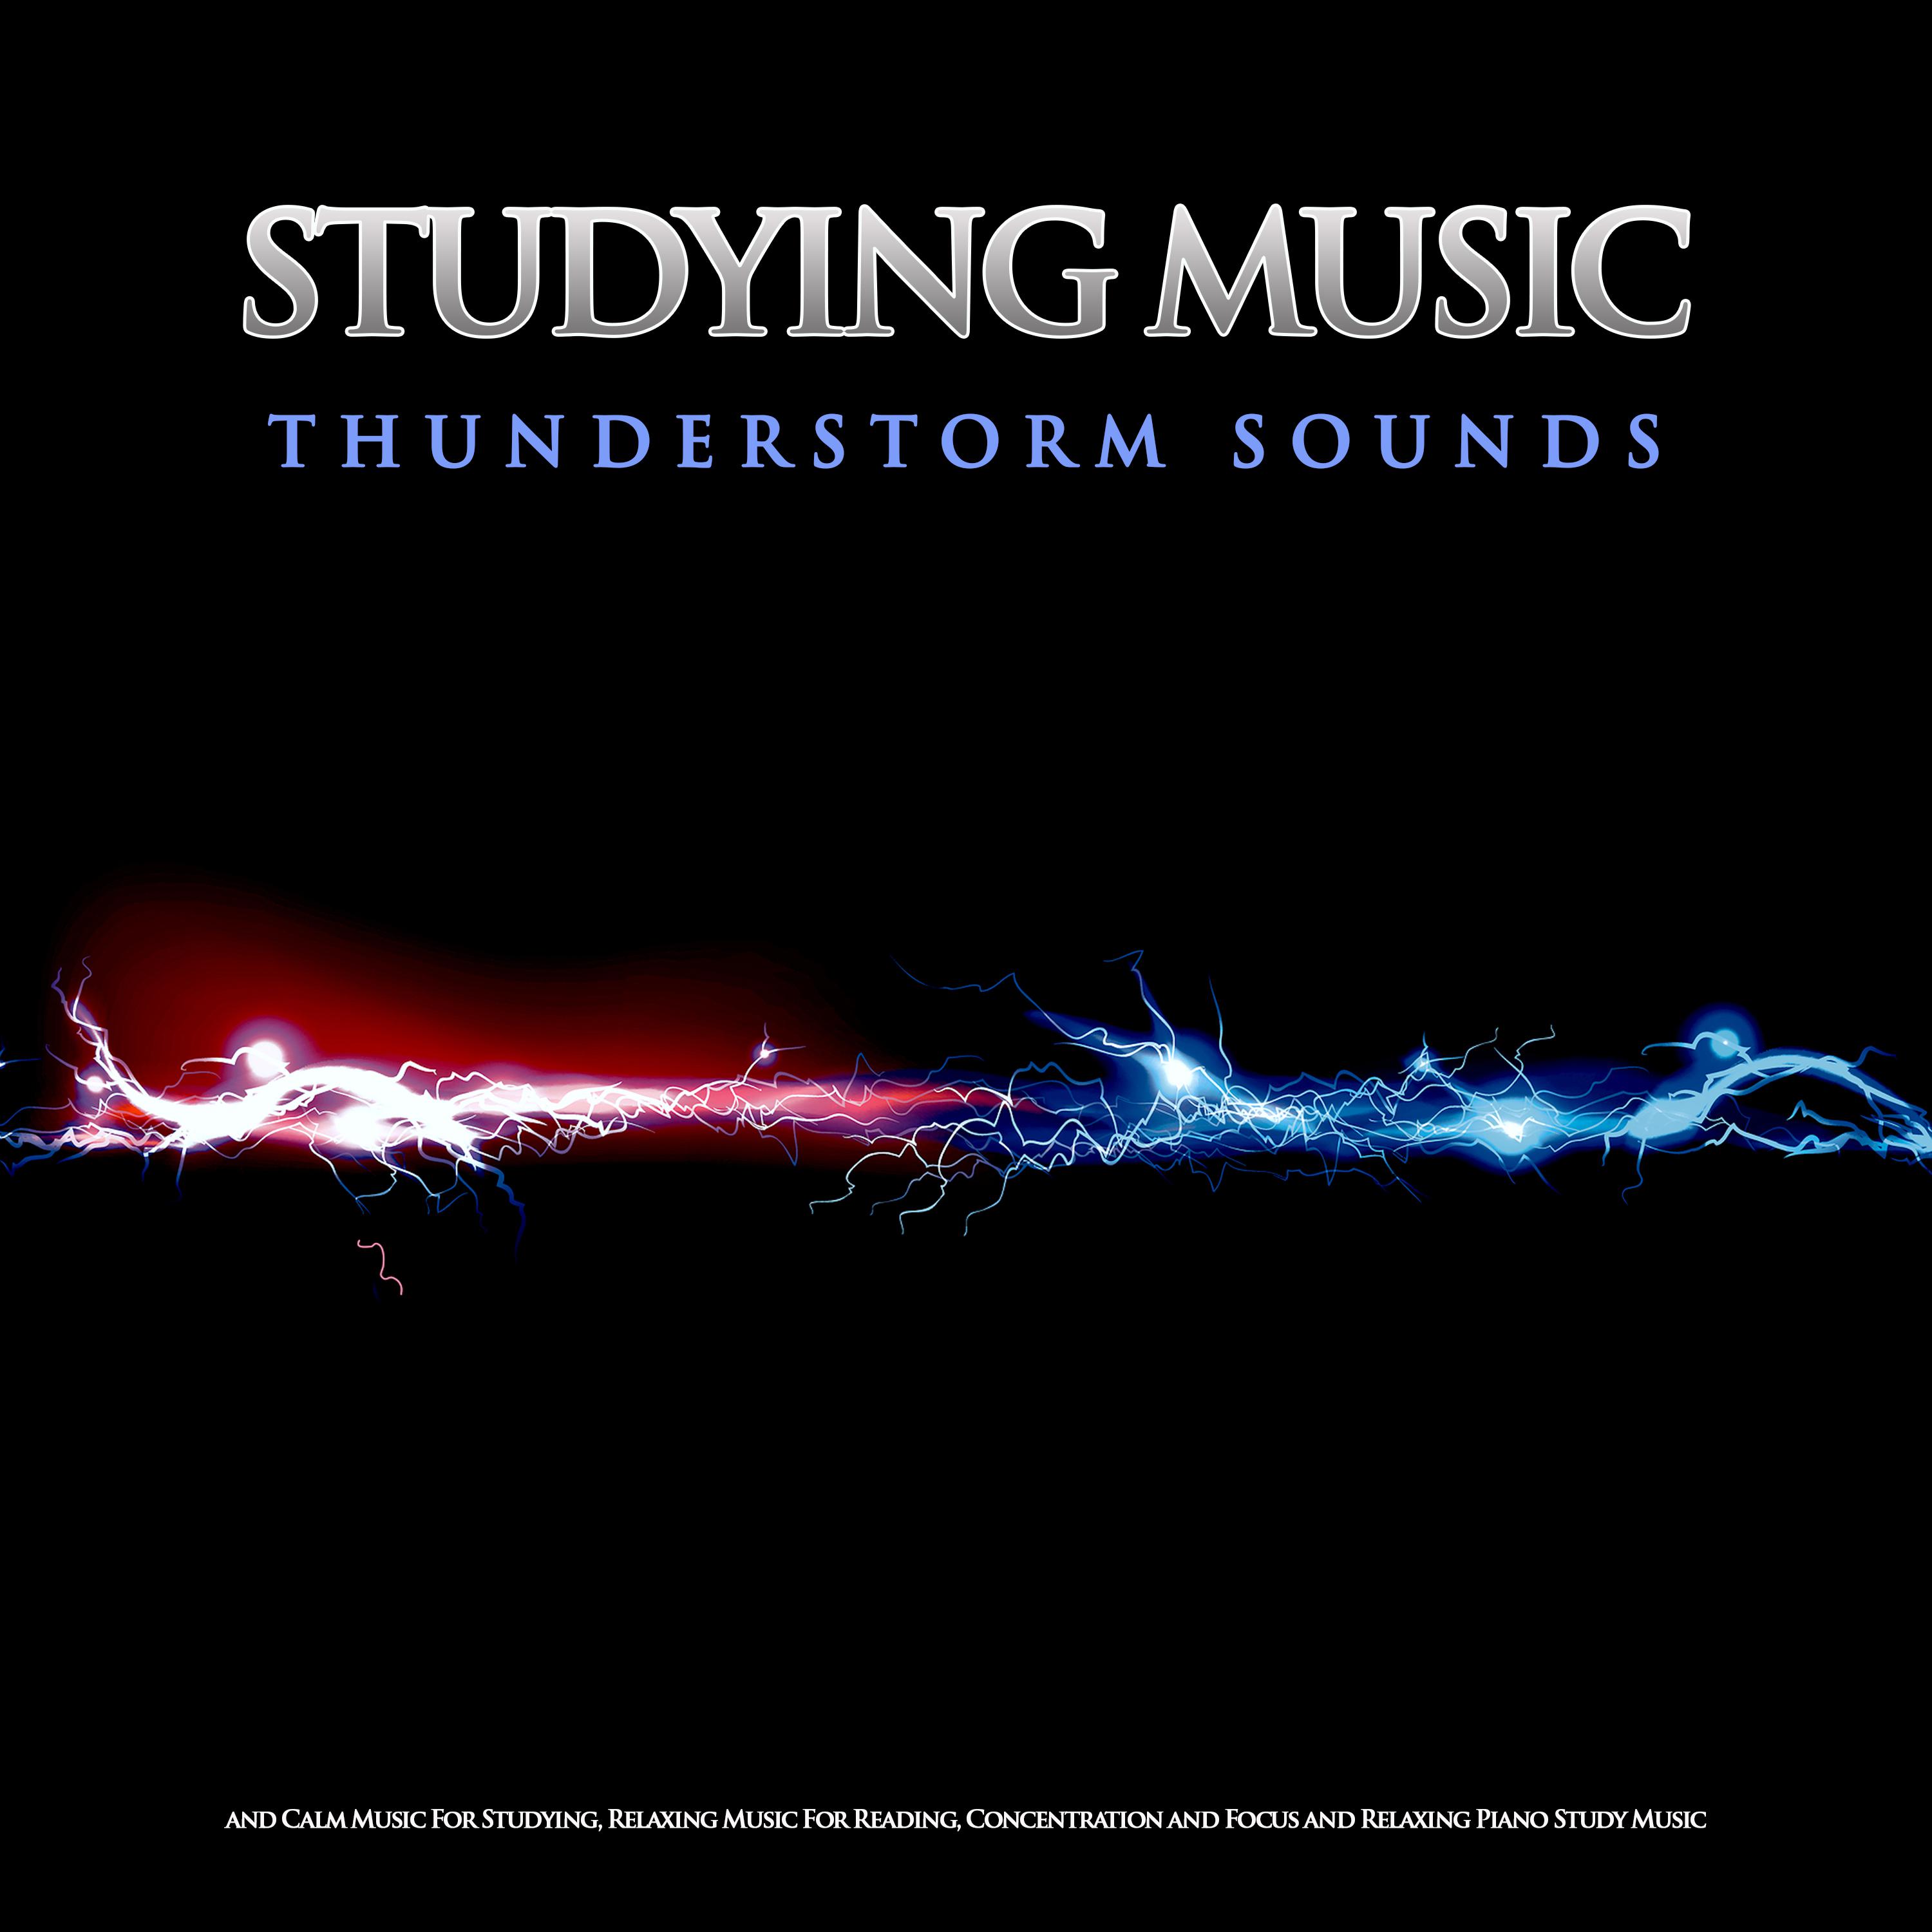 Studying Music and Thunderstorm Sounds